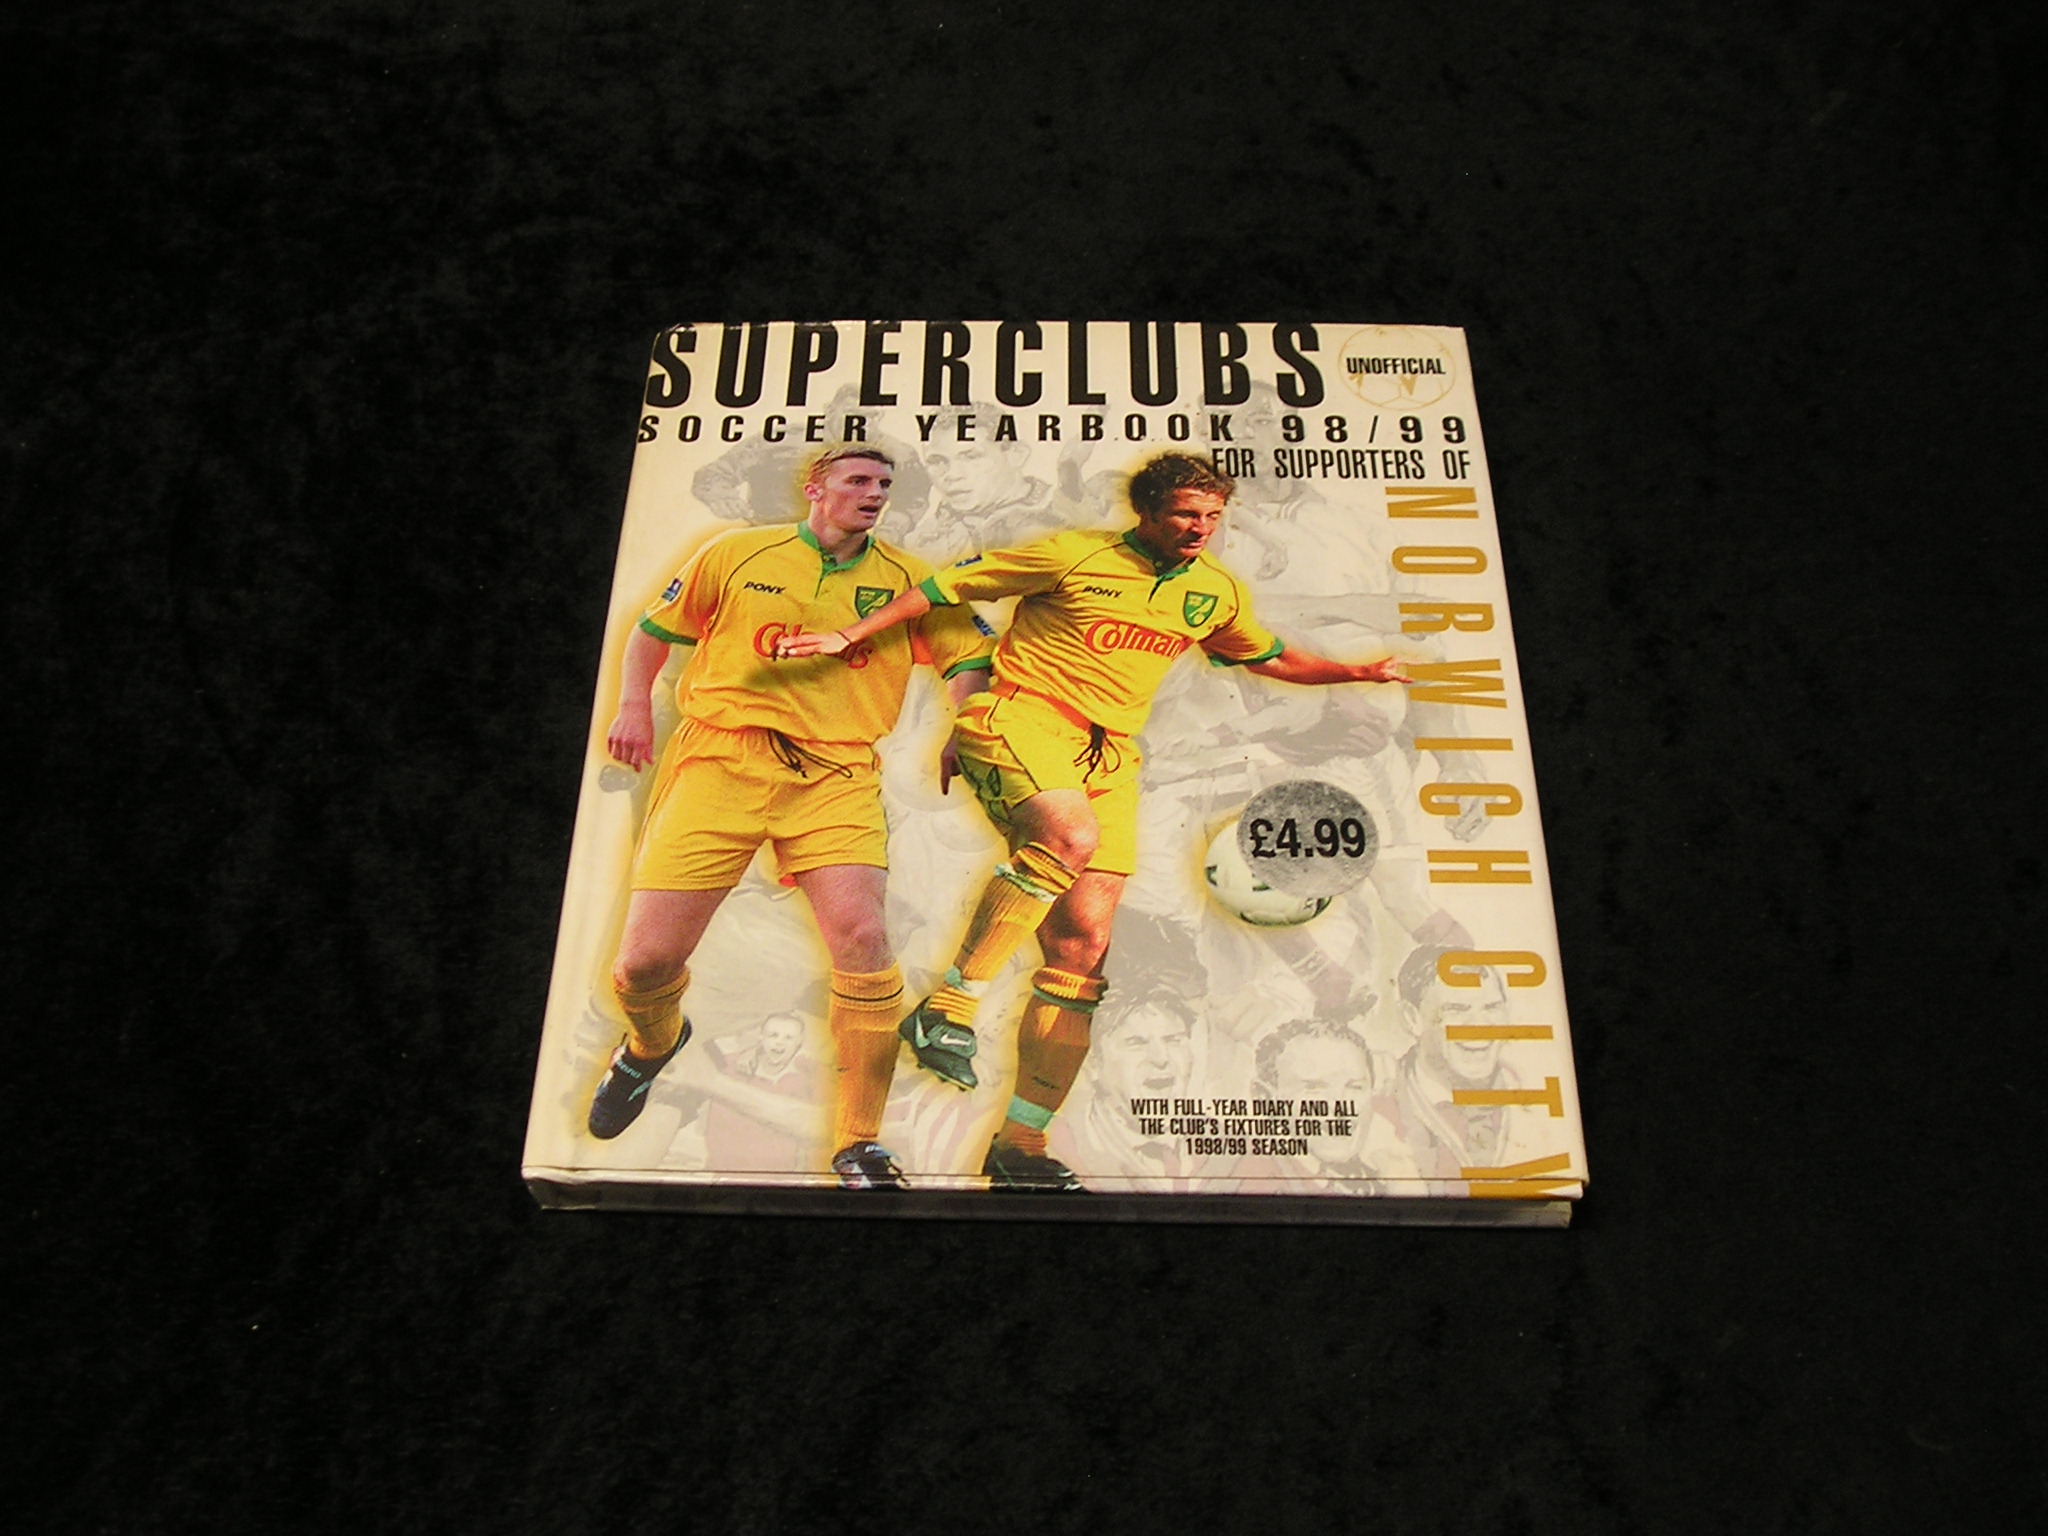 Image 0 of Superclubs Soccer Yearbook 1998/99 for Supporters of Norwich City